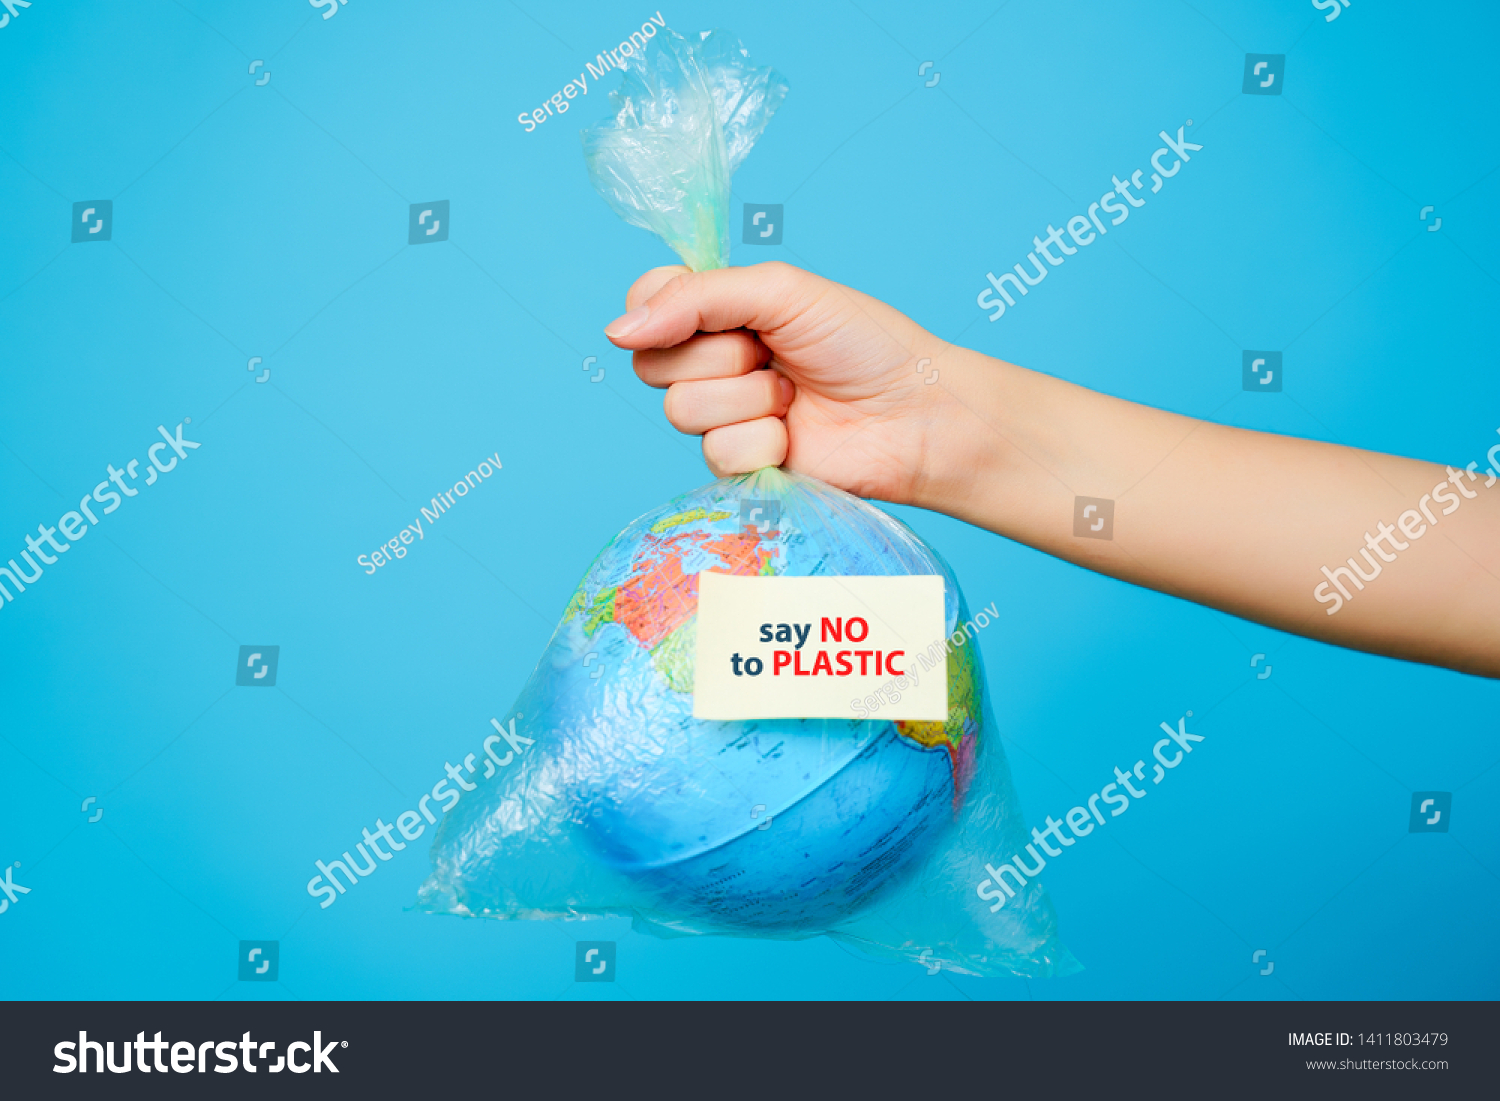 Woman holds in hands plastic bag and planet earth with text sticker-SAY NO TO PLASTIC at blue background. The concept of plastic pollution. #1411803479